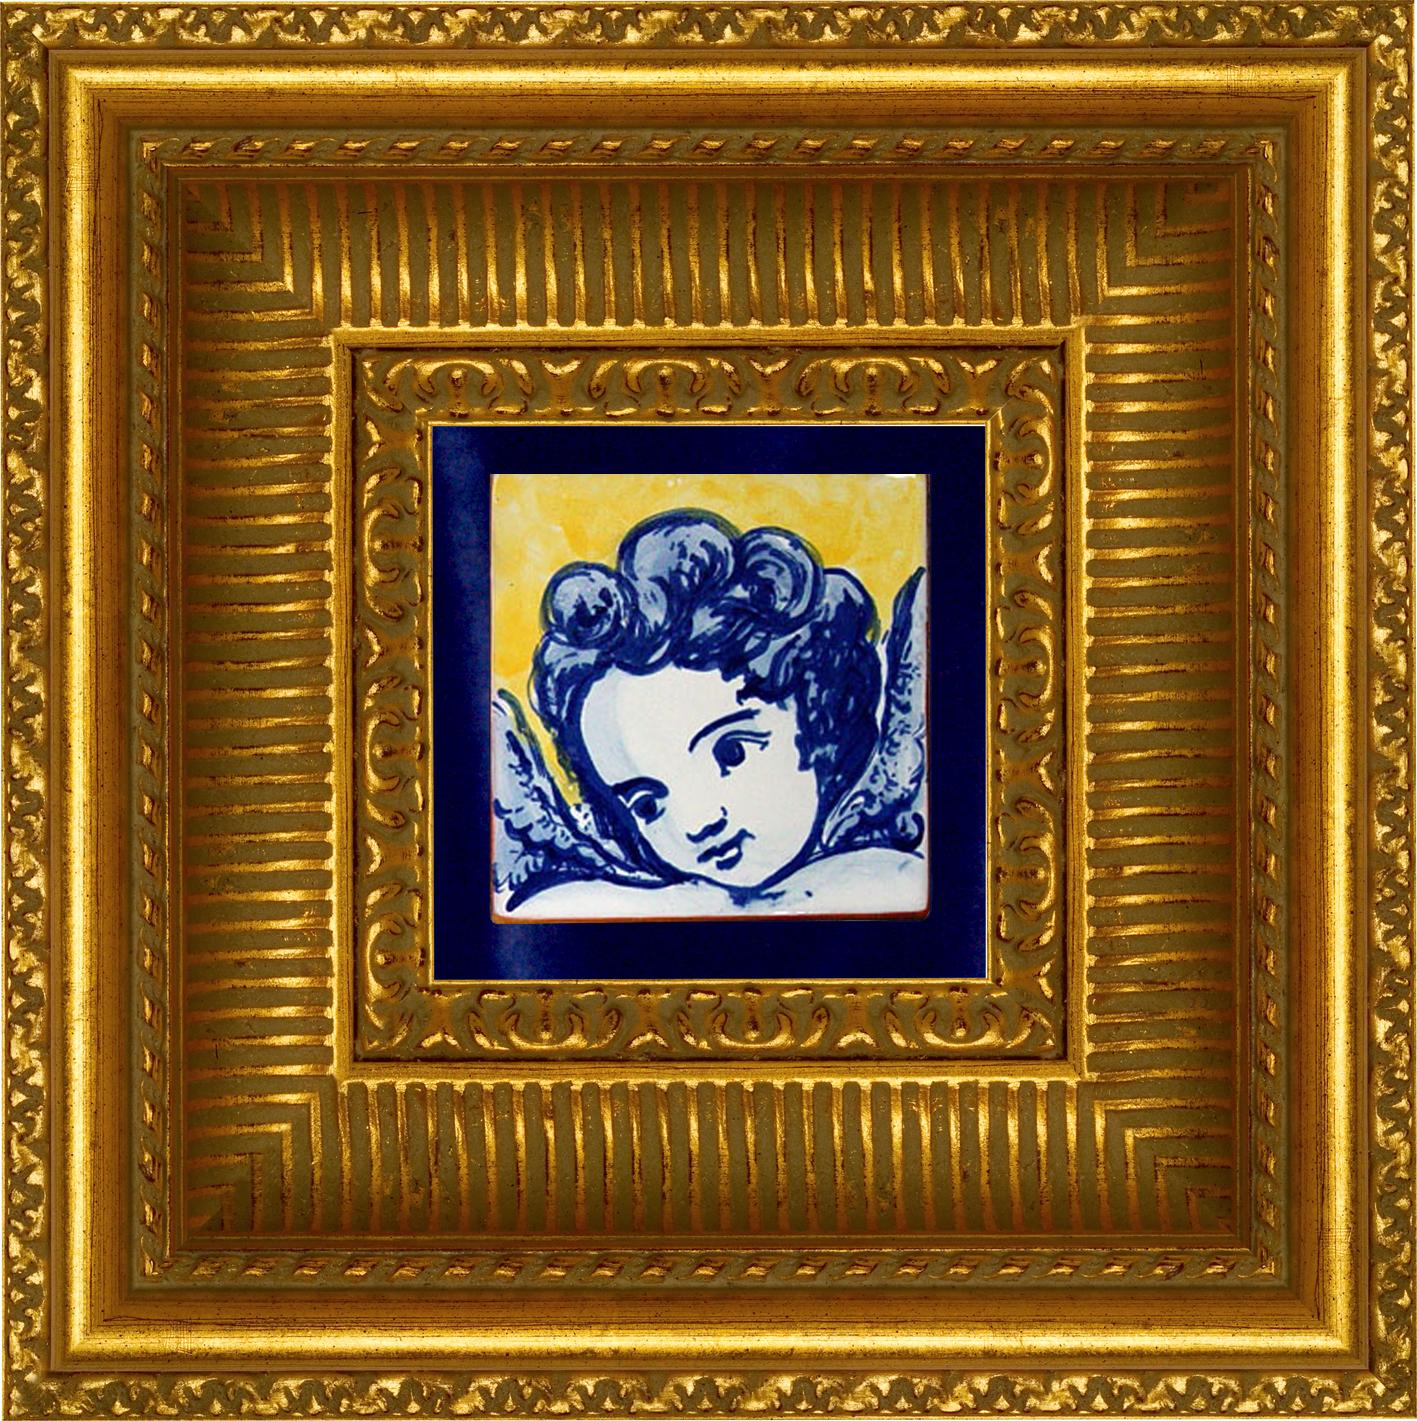 Gorgeous blue hand painted Baroque cherub or angel 18th century style Portuguese ceramic tile/azulejo
The tile painted in cobalt blue over white in typical 18th century Portugal set the taste for monumental ceramic tile applications in churches and